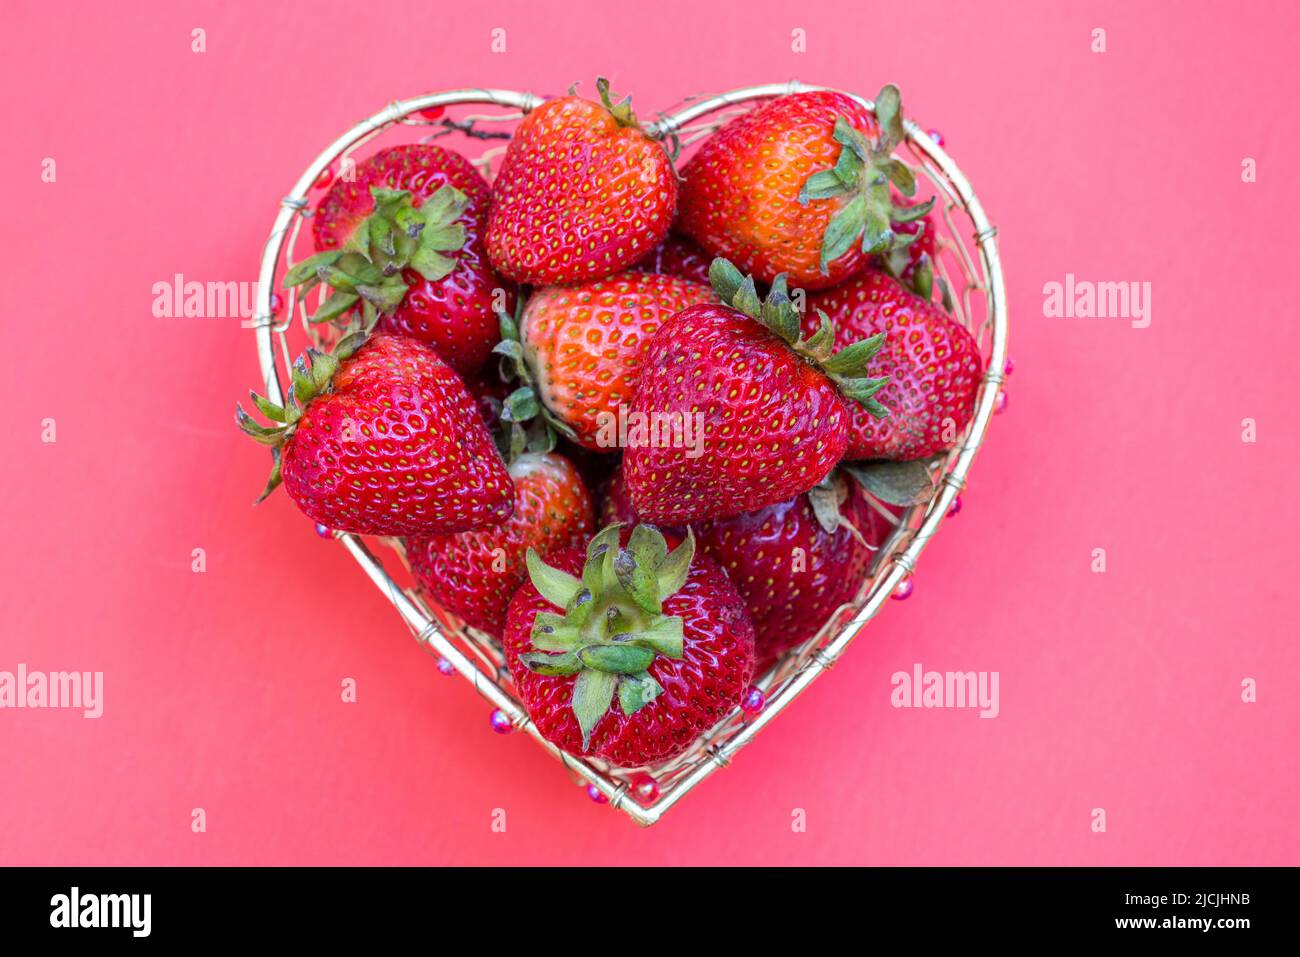 Bright red strawberries in a heart shaped wire basket on a white background Stock Photo